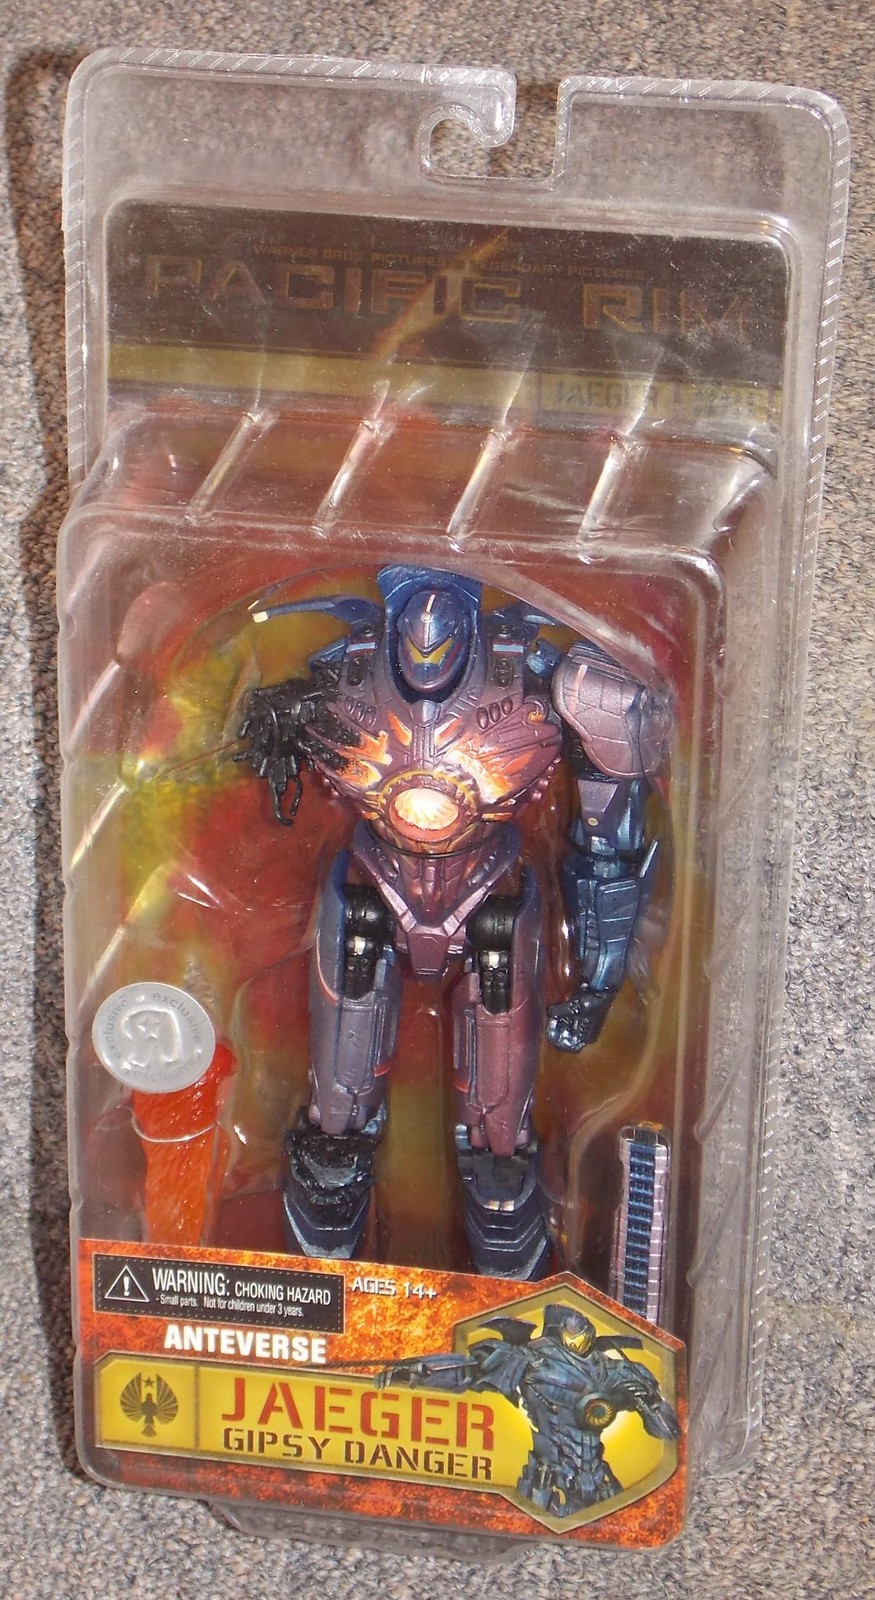 NECA 2015 Pacific Rim Jaeger Gipsy Danger 7 inch Figure New In Package Toys R US - $59.99